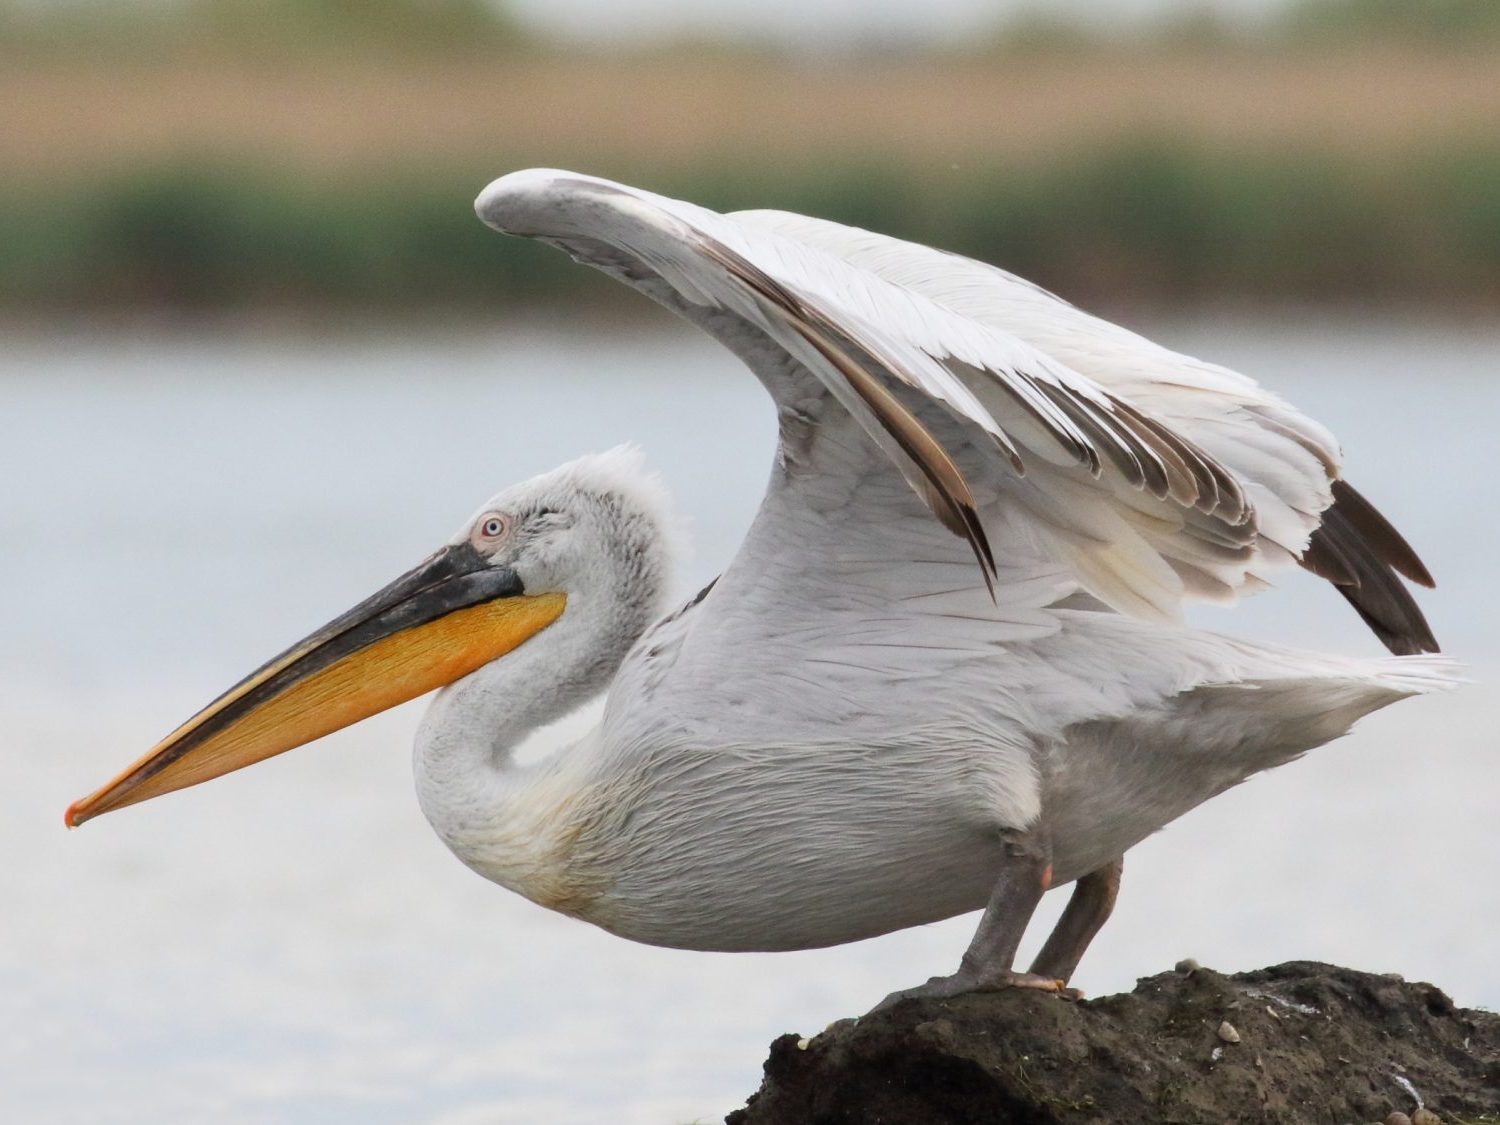 Dalmatian Pelican with wings outstretched in the Danube Delta